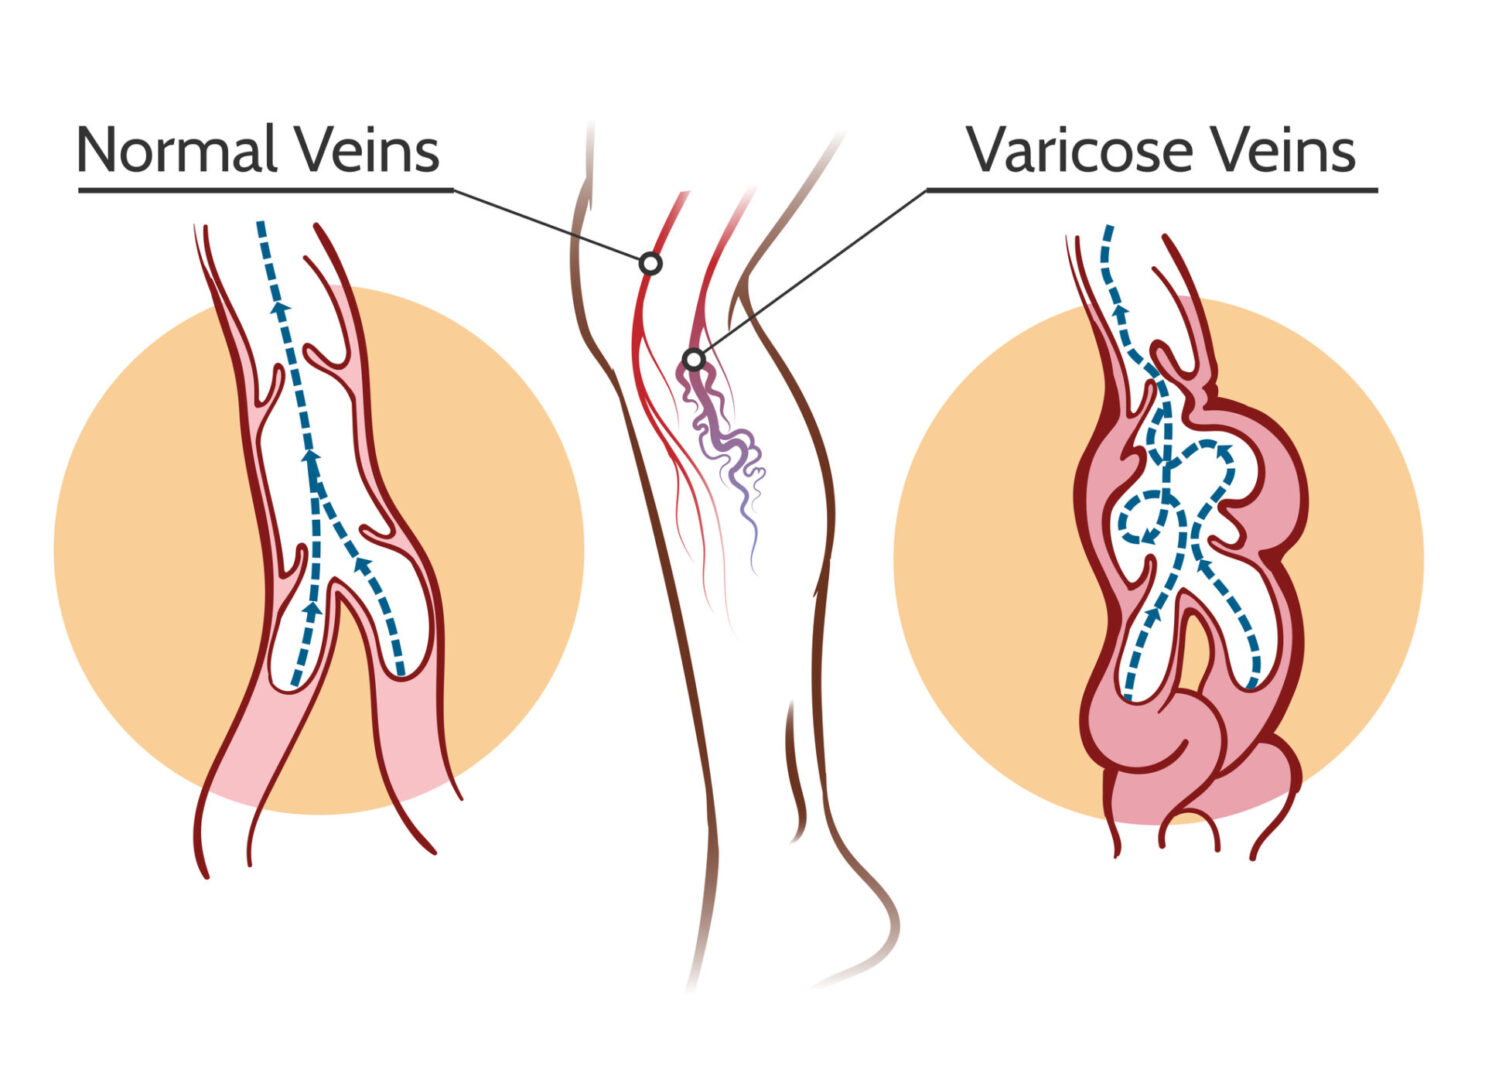 A vein is shown with the names of different veins.